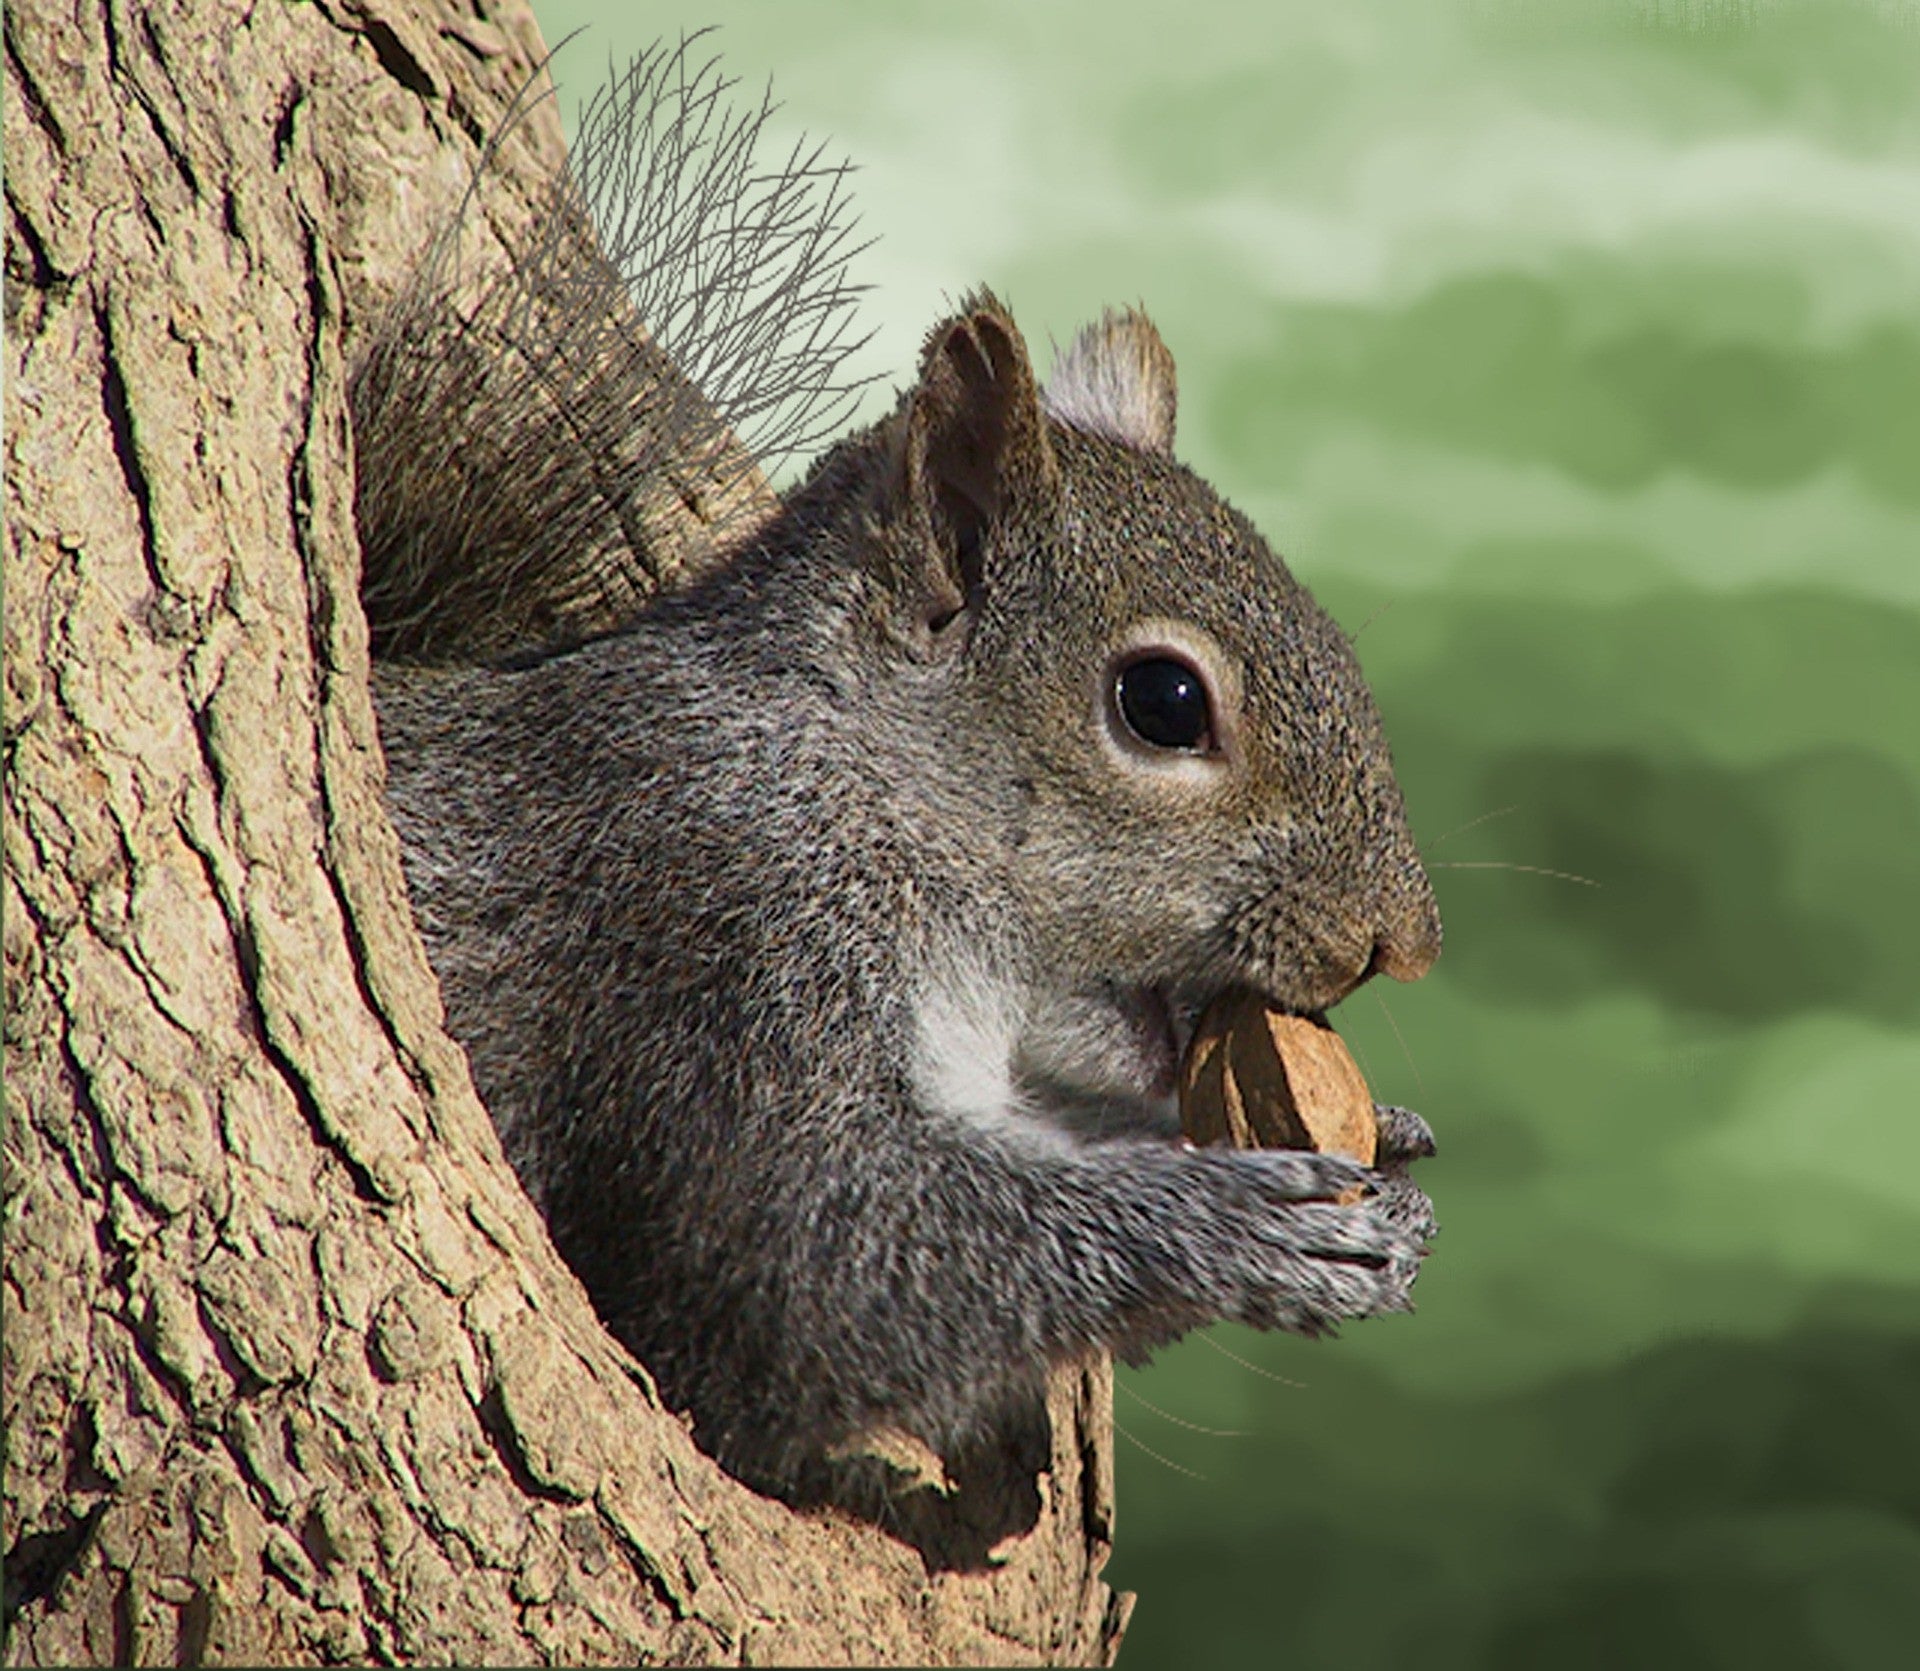 Which animals eat nuts?